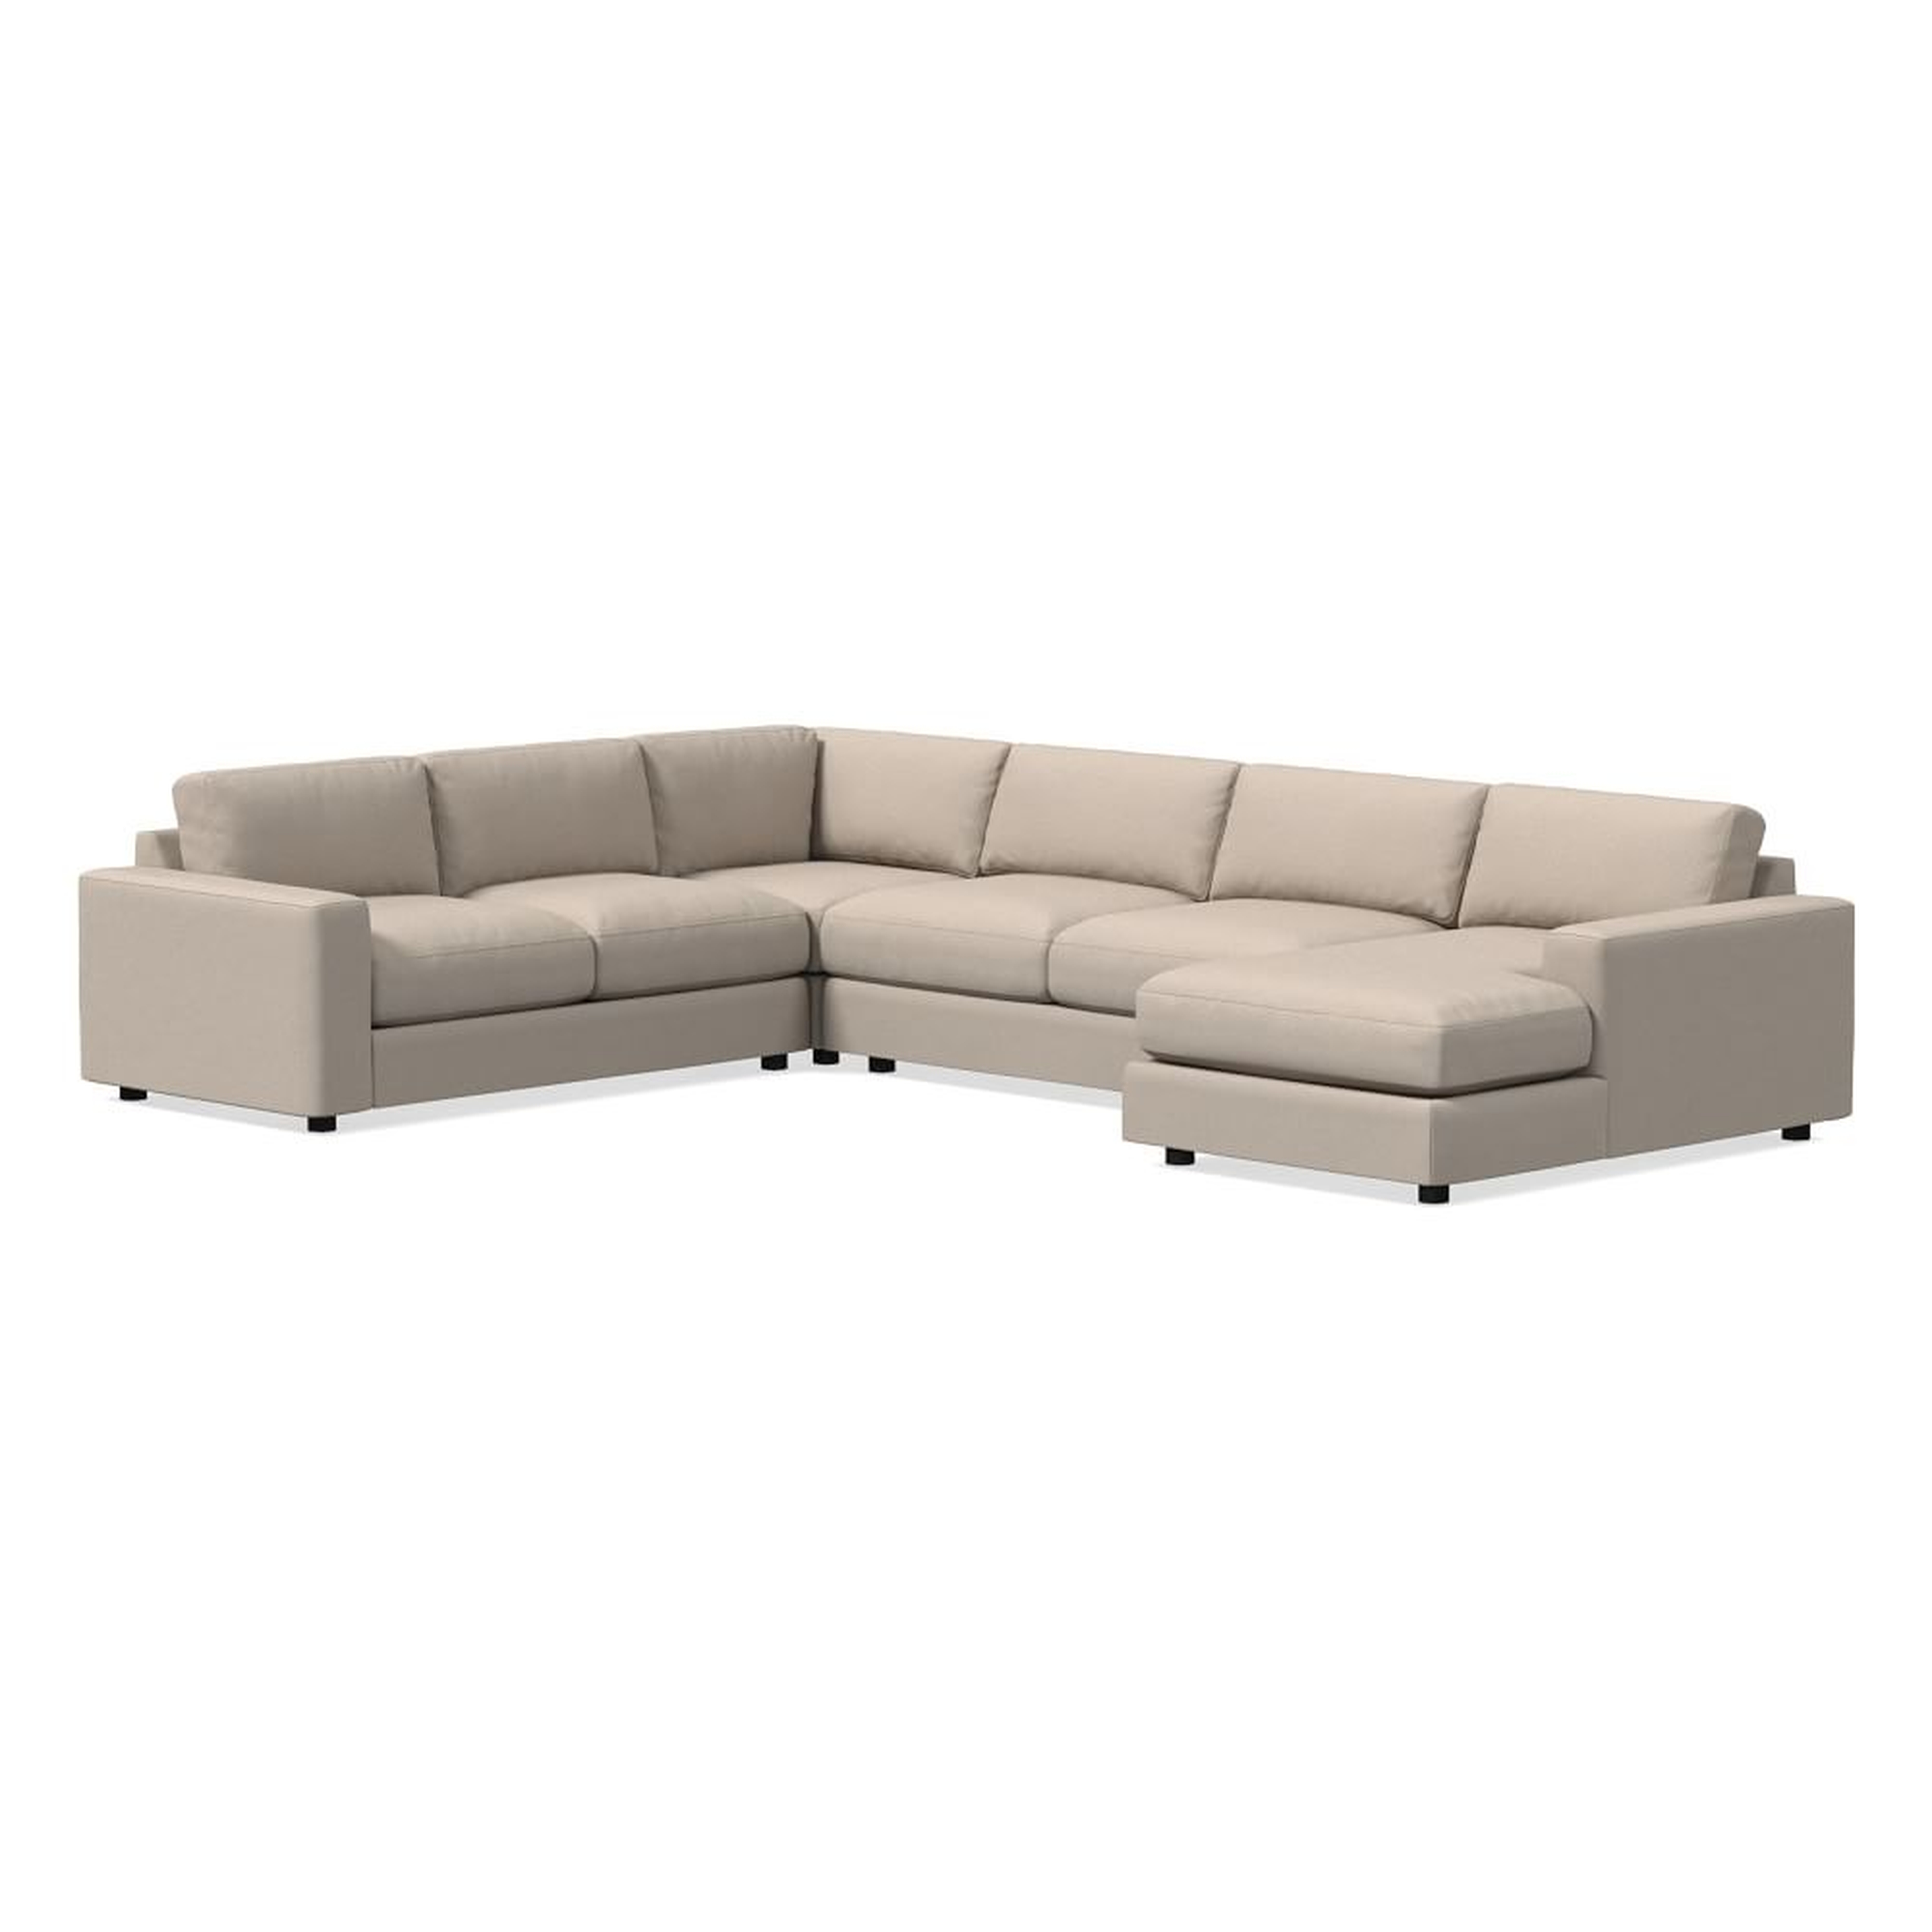 Urban 116" Right 4-Piece Chaise Sectional, Performance Yarn Dyed Linen Weave, Sand, Poly-Fill - West Elm